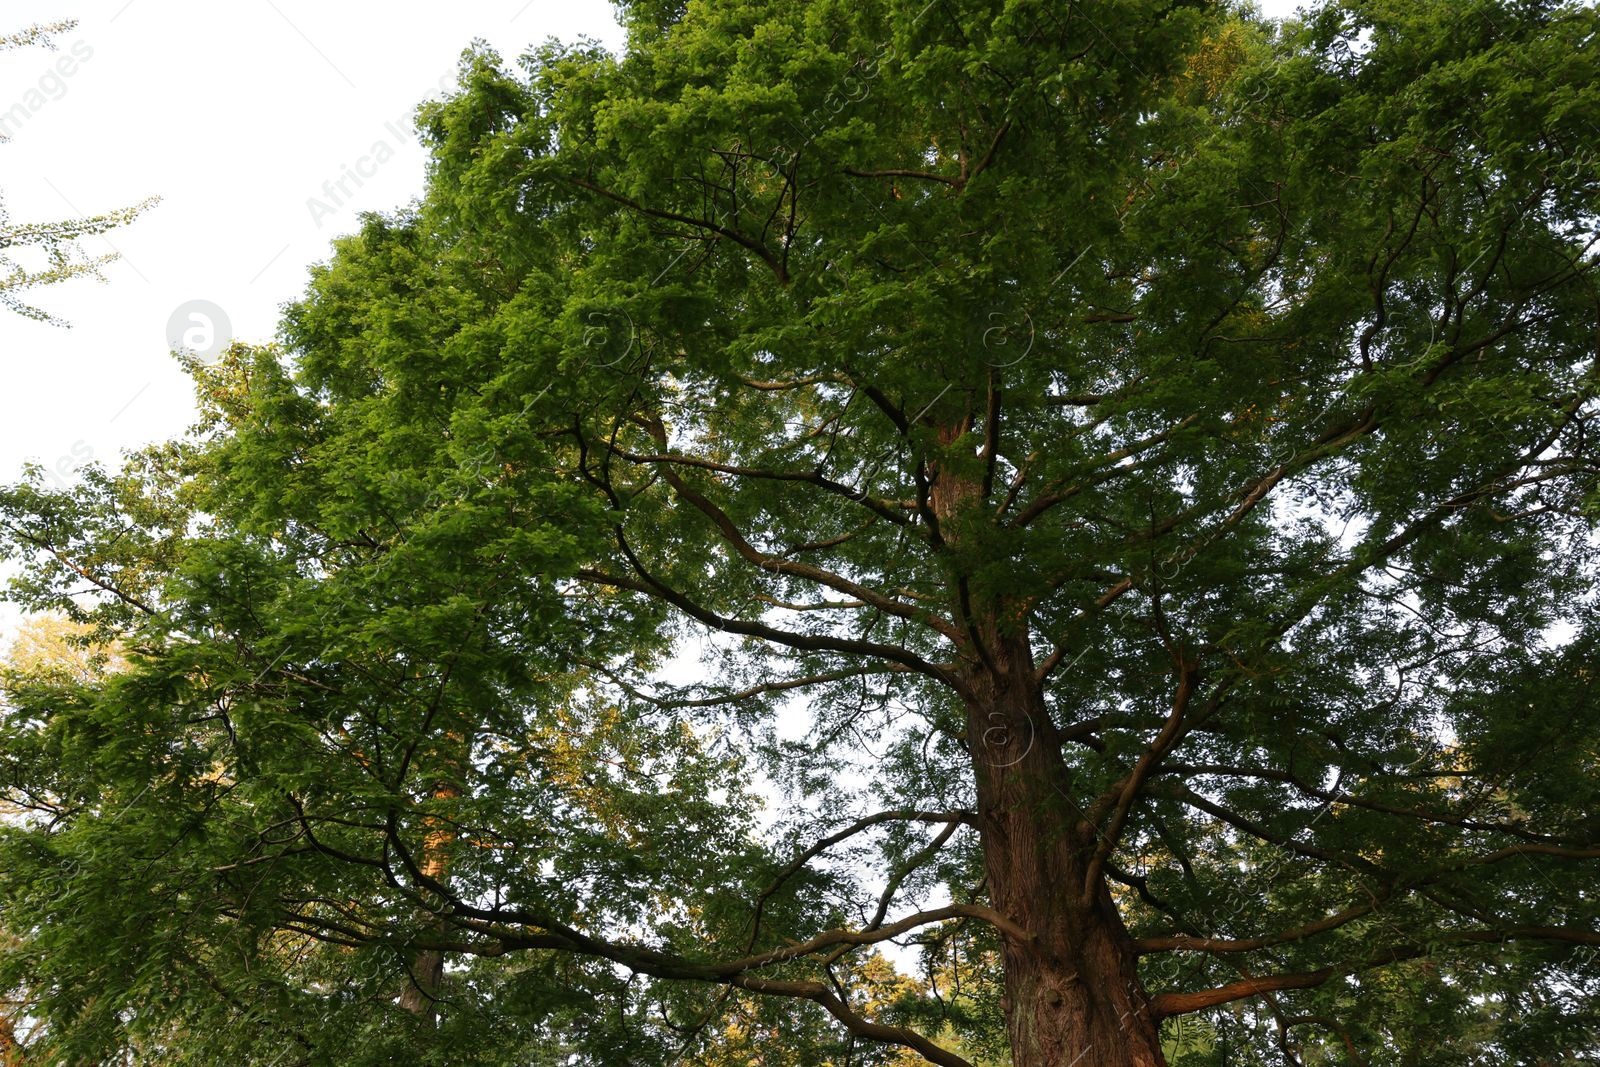 Photo of Beautiful tree with green leaves growing outdoors, low angle view